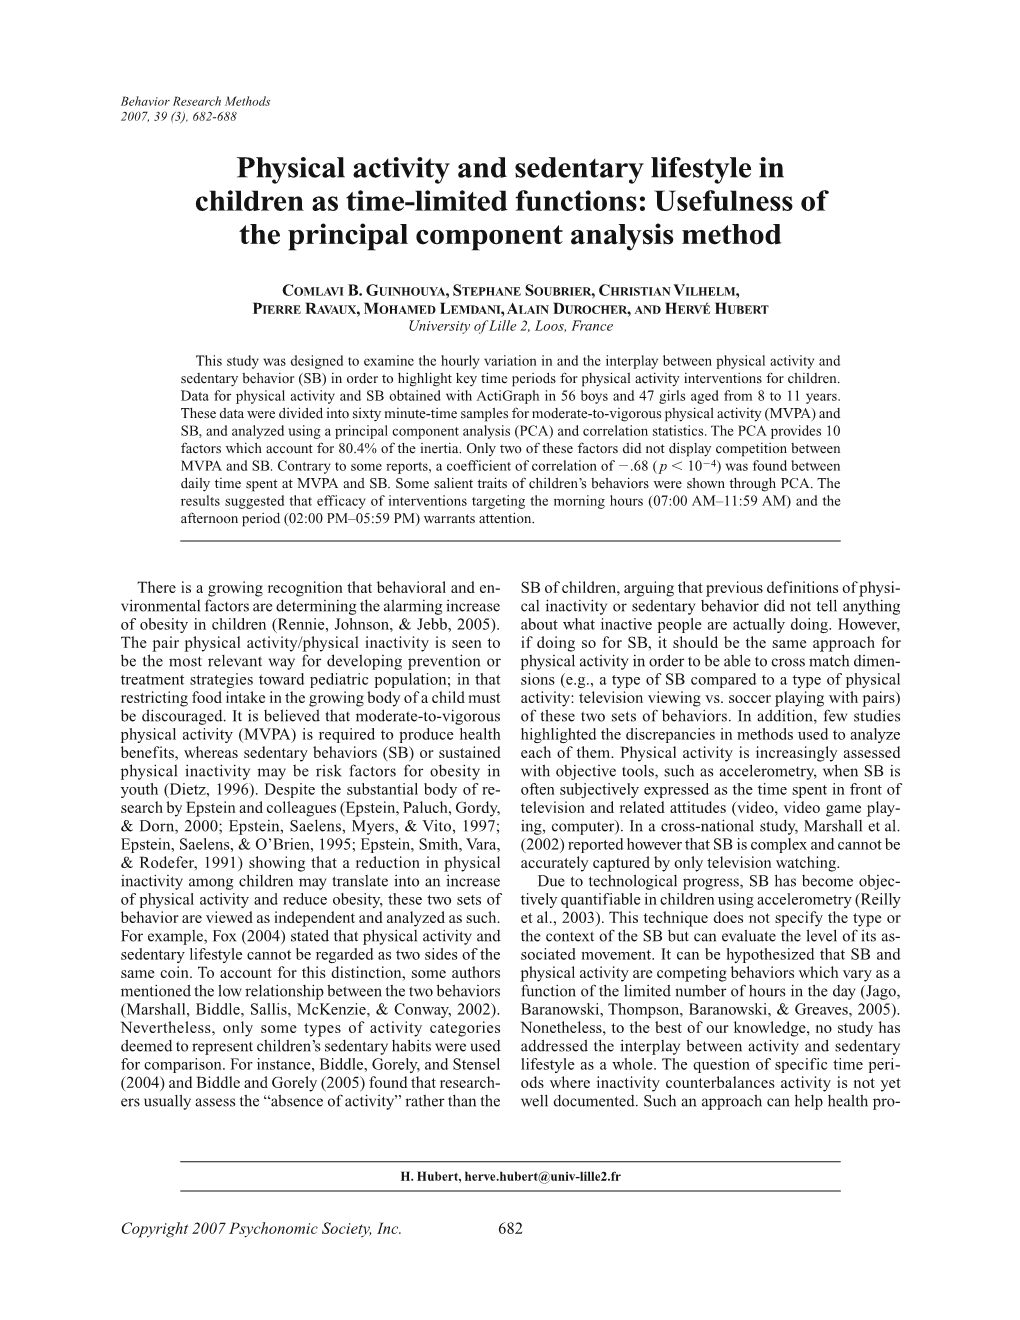 Physical Activity and Sedentary Lifestyle in Children As Time-Limited Functions: Usefulness of the Principal Component Analysis Method